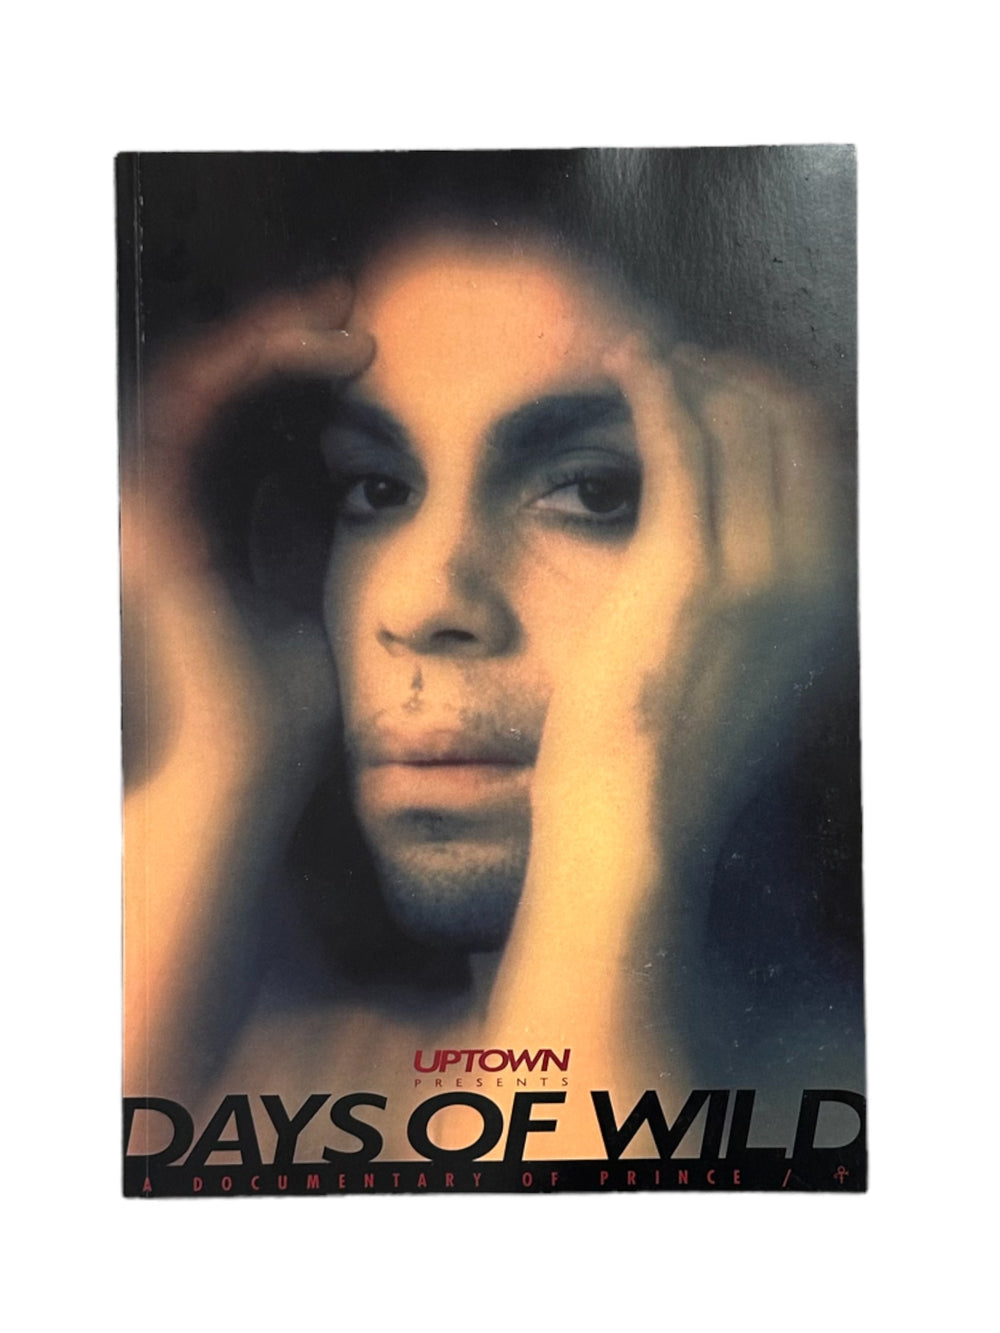 Prince – Days Of Wild Documentary Of Prince by Uptown  WITH CD ROM